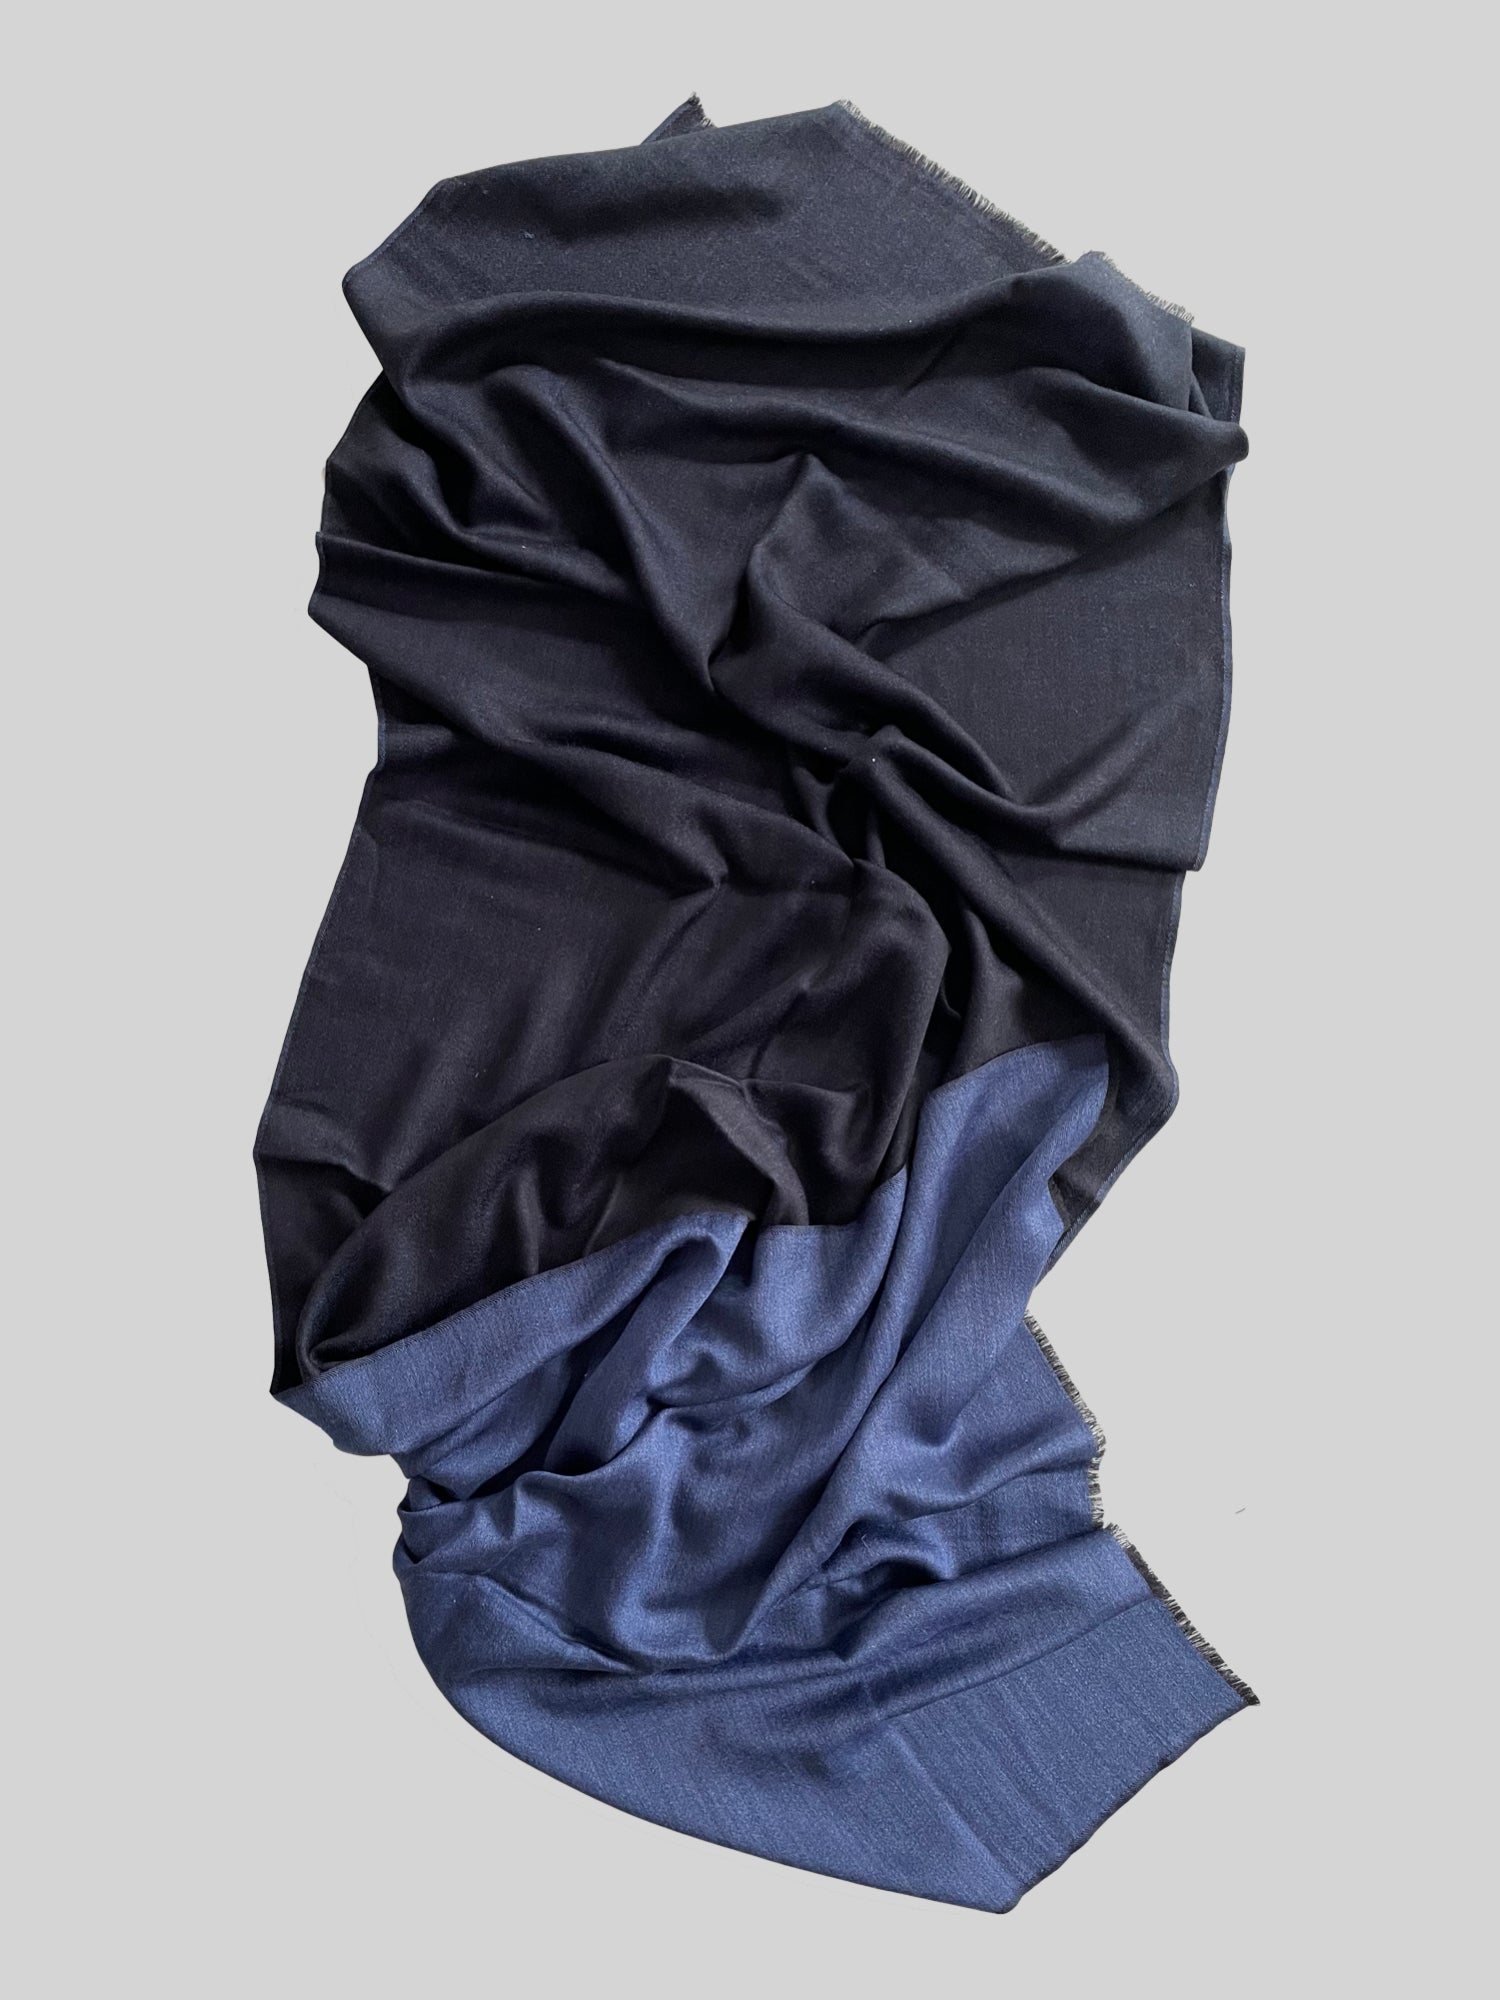 WOVEN Reversible Cashmere Scarf - Blue